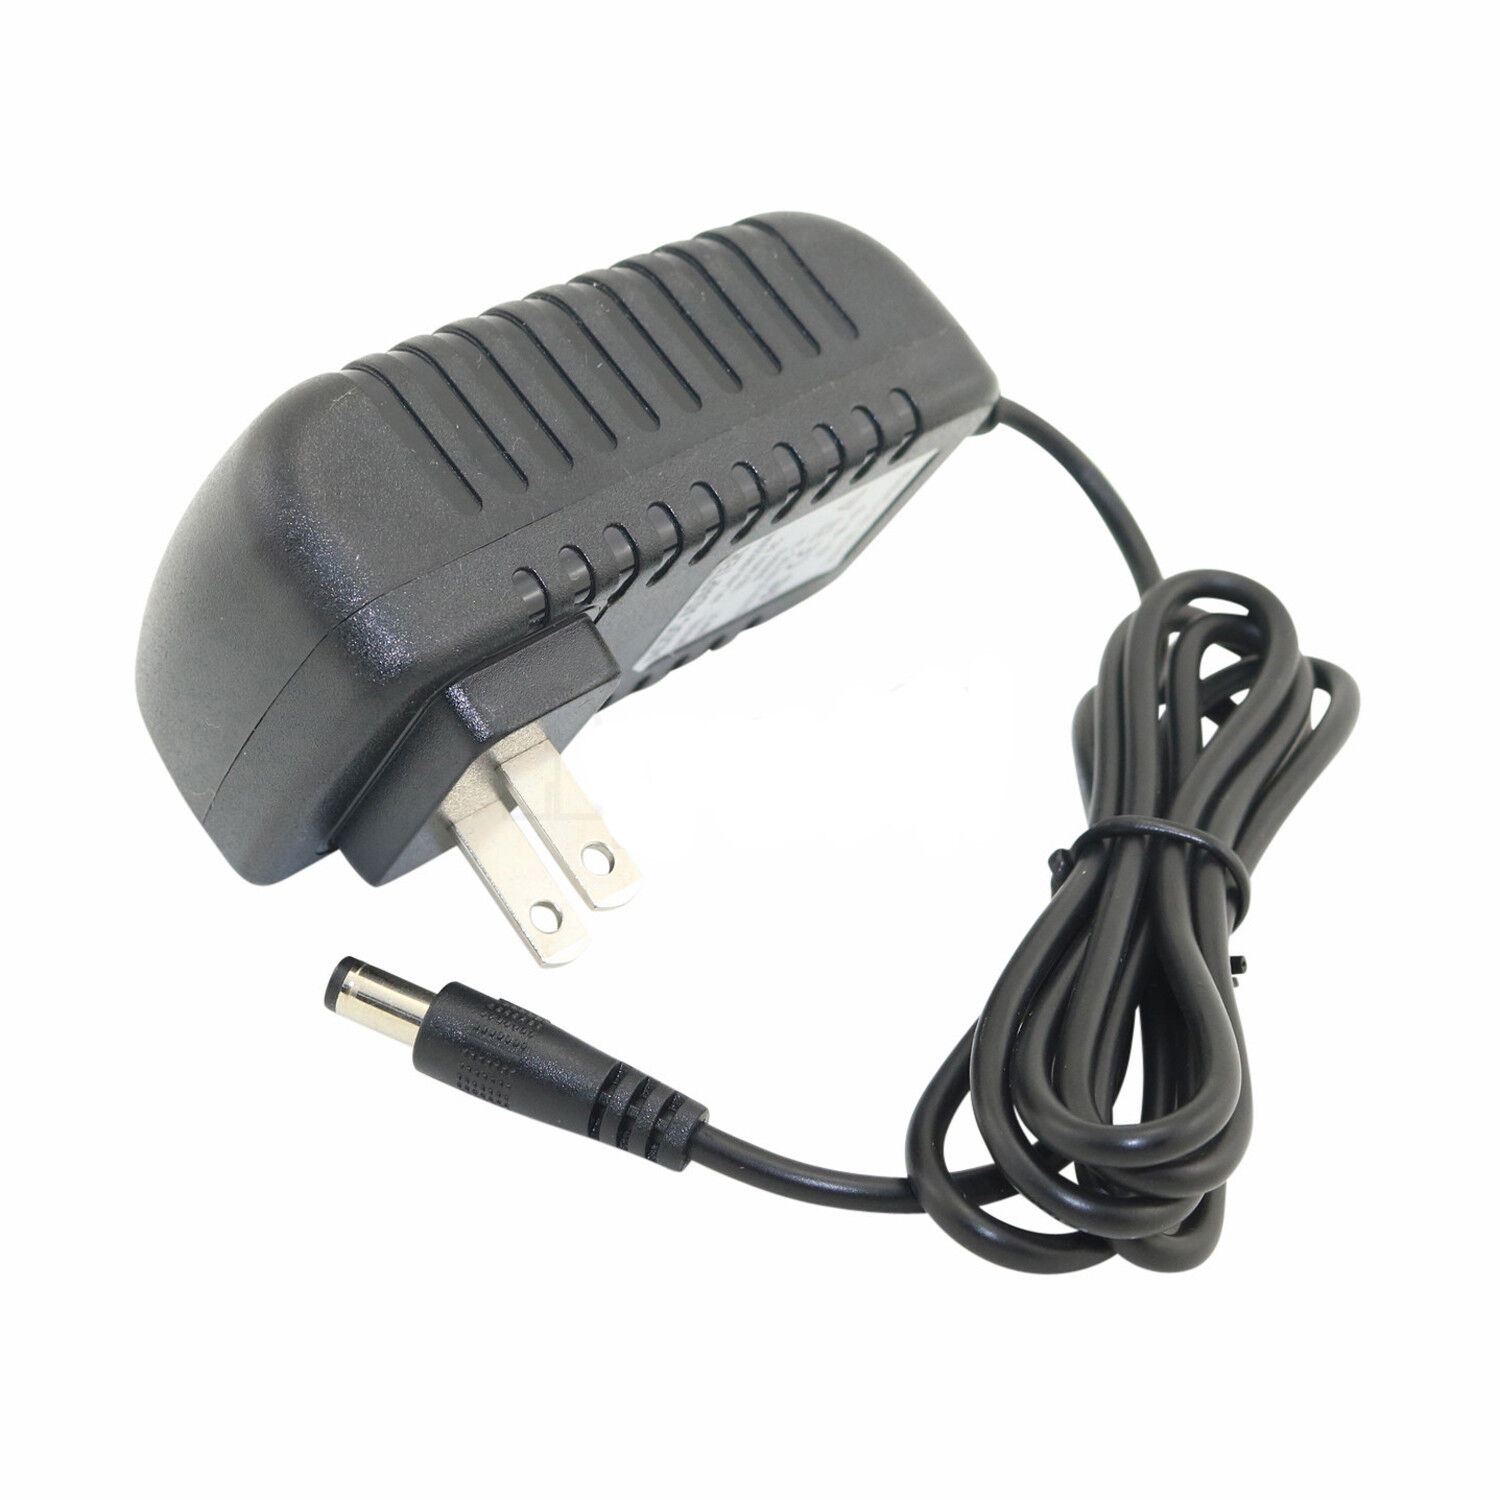 ELO TouchSystems E005277 Power Brick and Cable Kit 12V 5A Adapter Charger For 12V 5A Adapter Charger For ELO TouchSyst